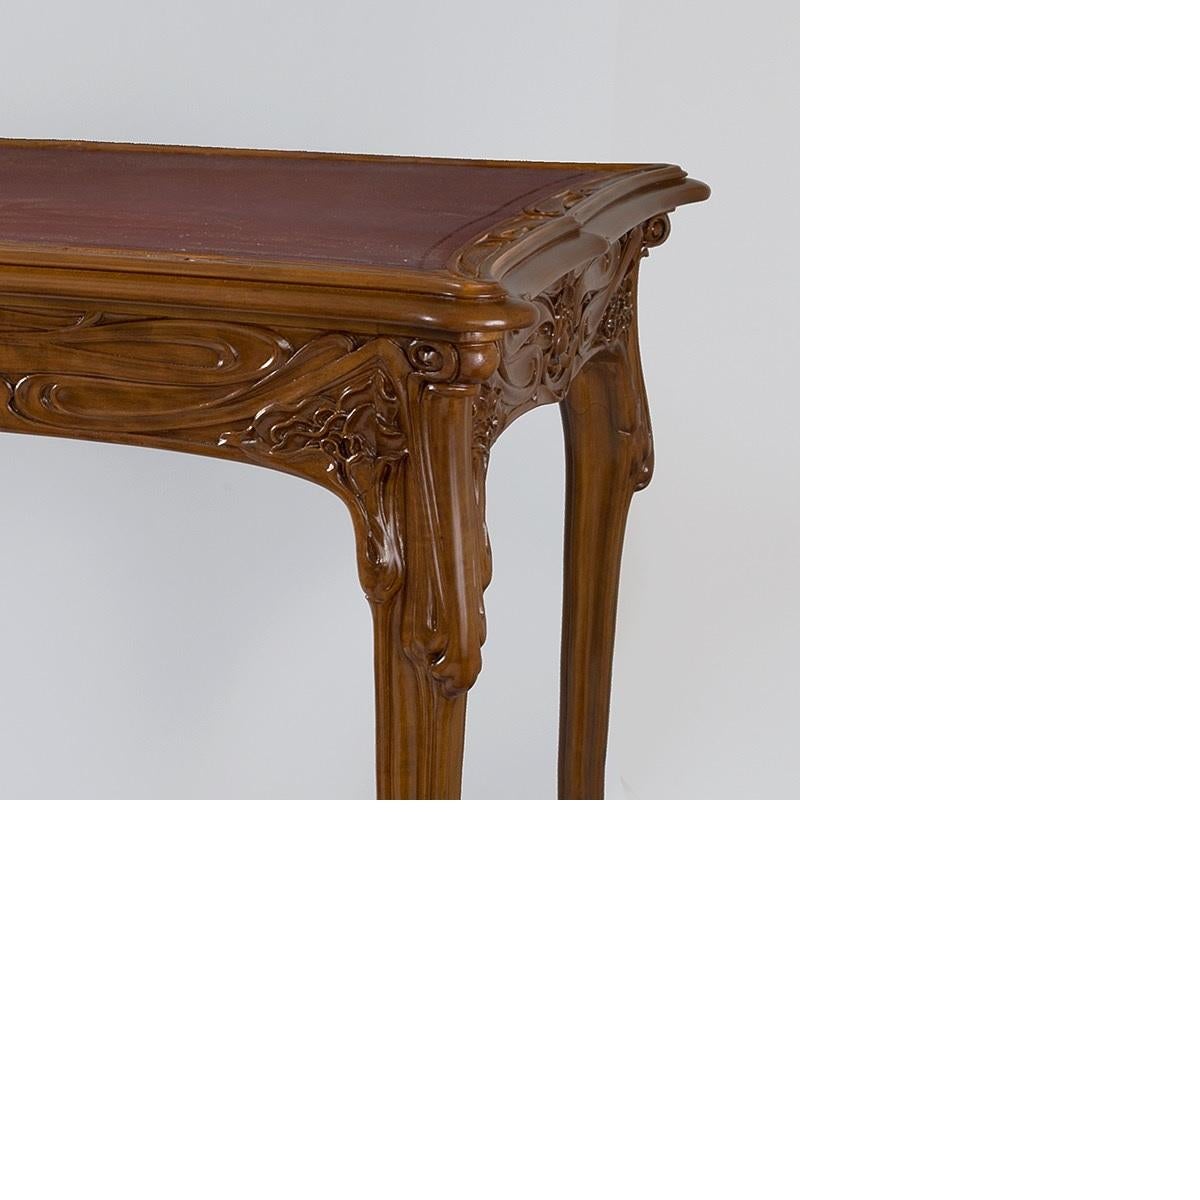 An exceptional French Art Nouveau fruitwood table attributed to Edouard Colonna with a black felt center, flanked by a scalloped decoration of vegetal carvings. The slightly curved legs adorn a rich decor of flowers and plants in relief, circa